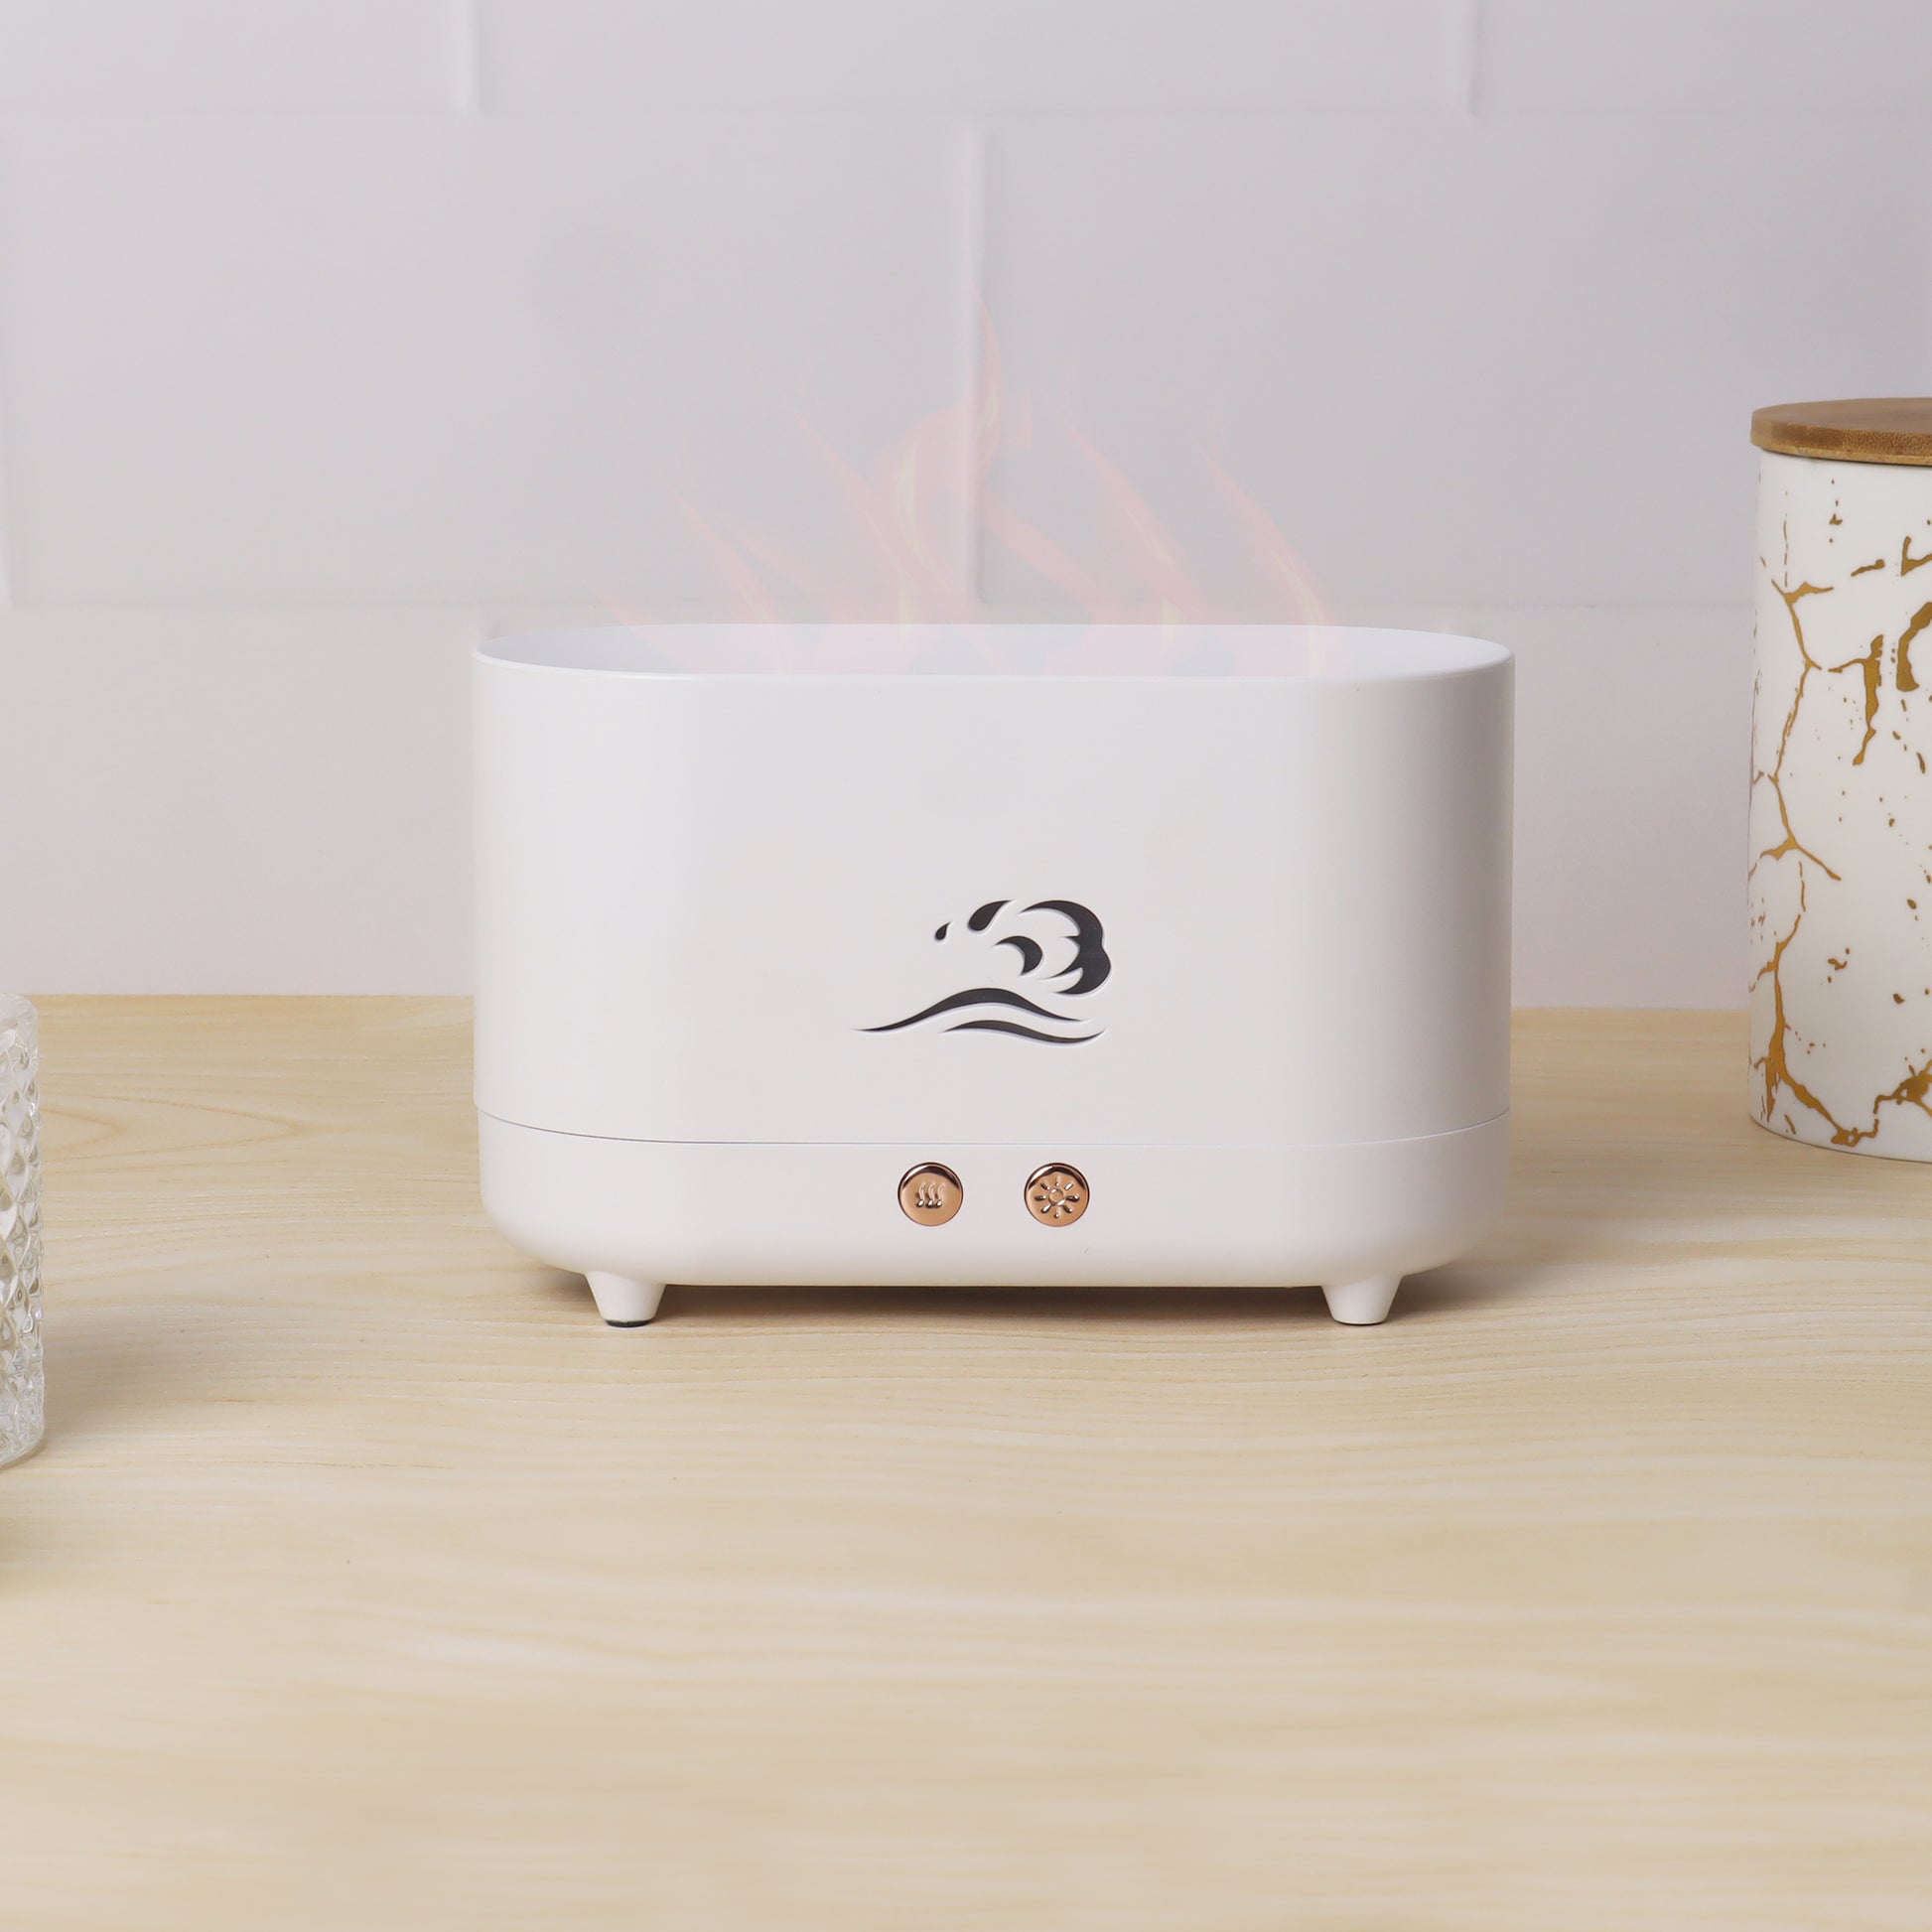 Aromatherapy diffuser - create a serene ambiance with soothing scents